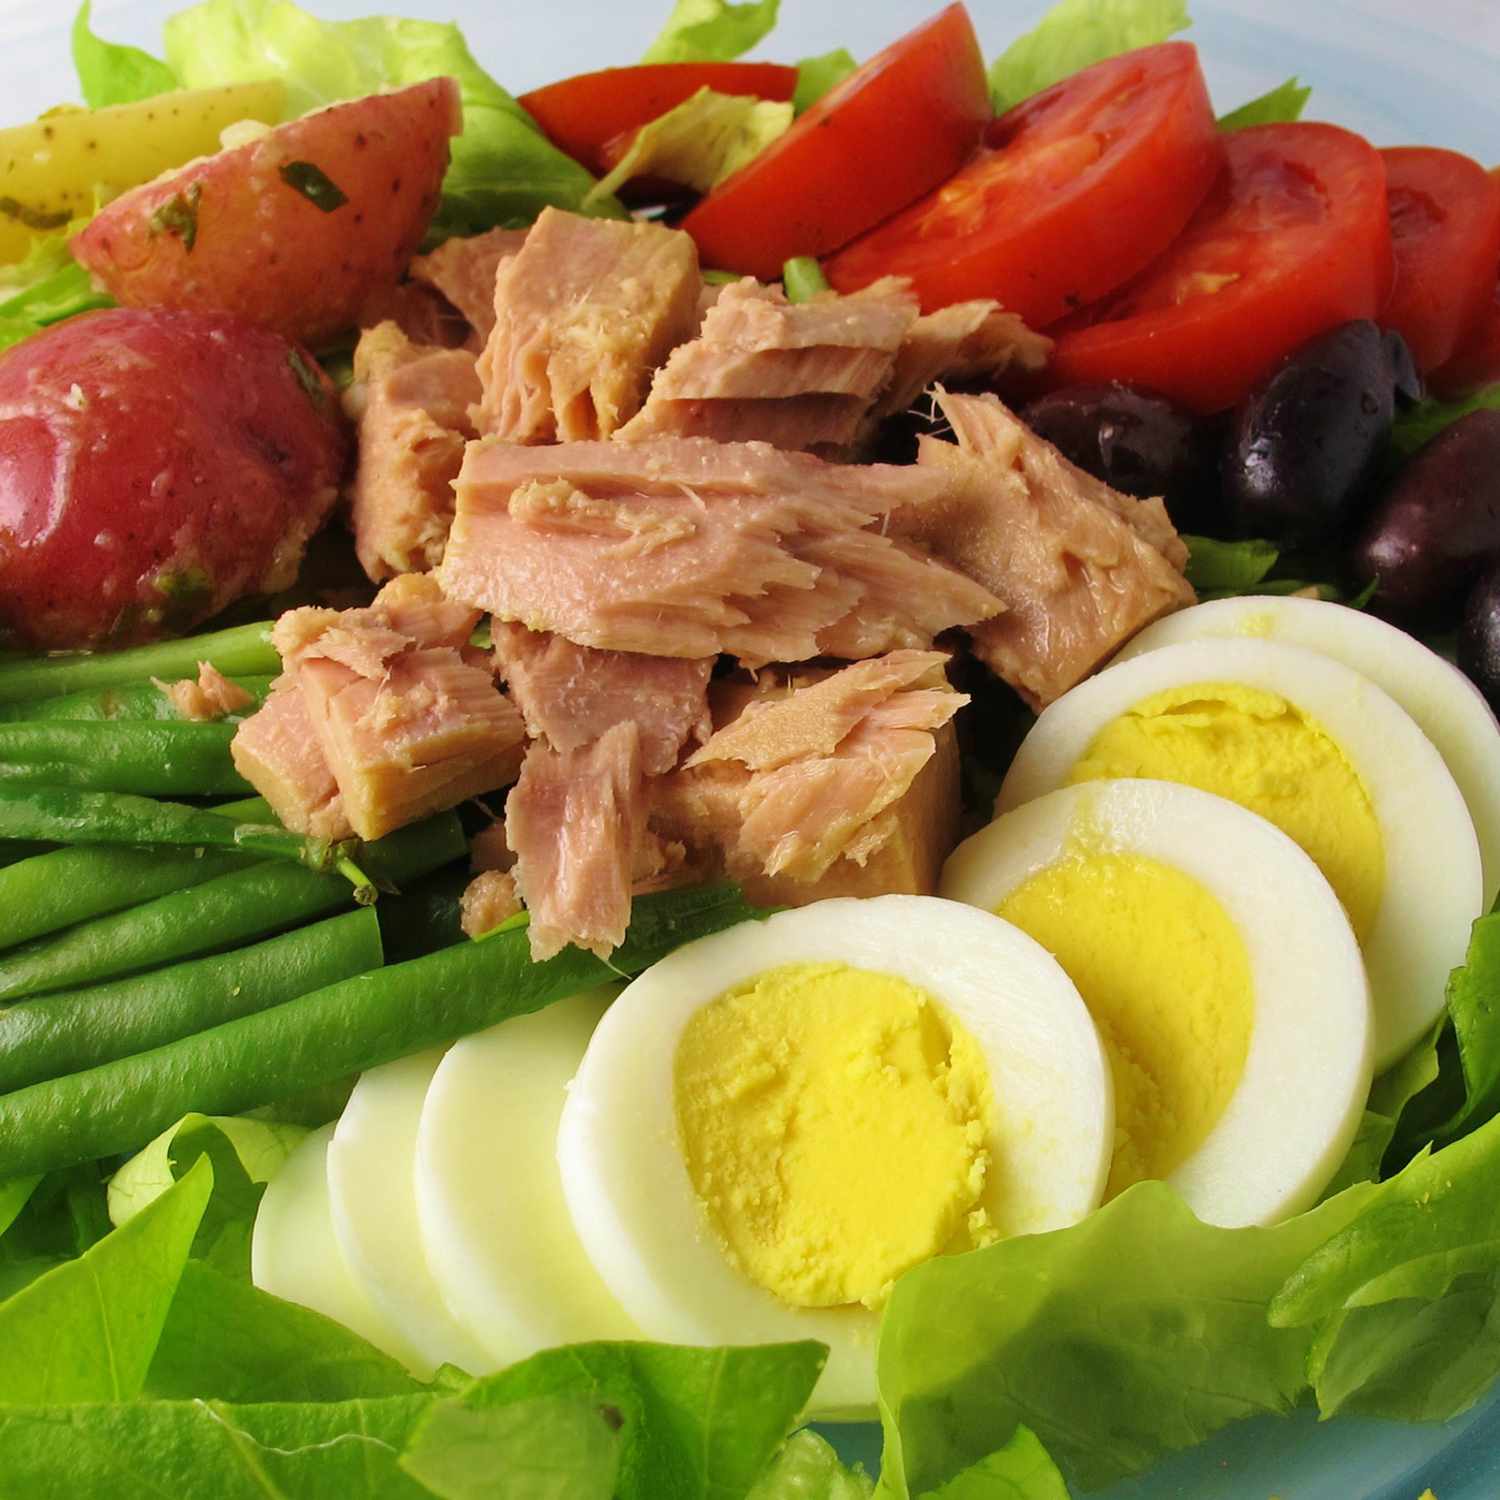 close up view of Salad Nicoise, with tuna, eggs, potatoes, tomatoes, lettuce, olives and green beans